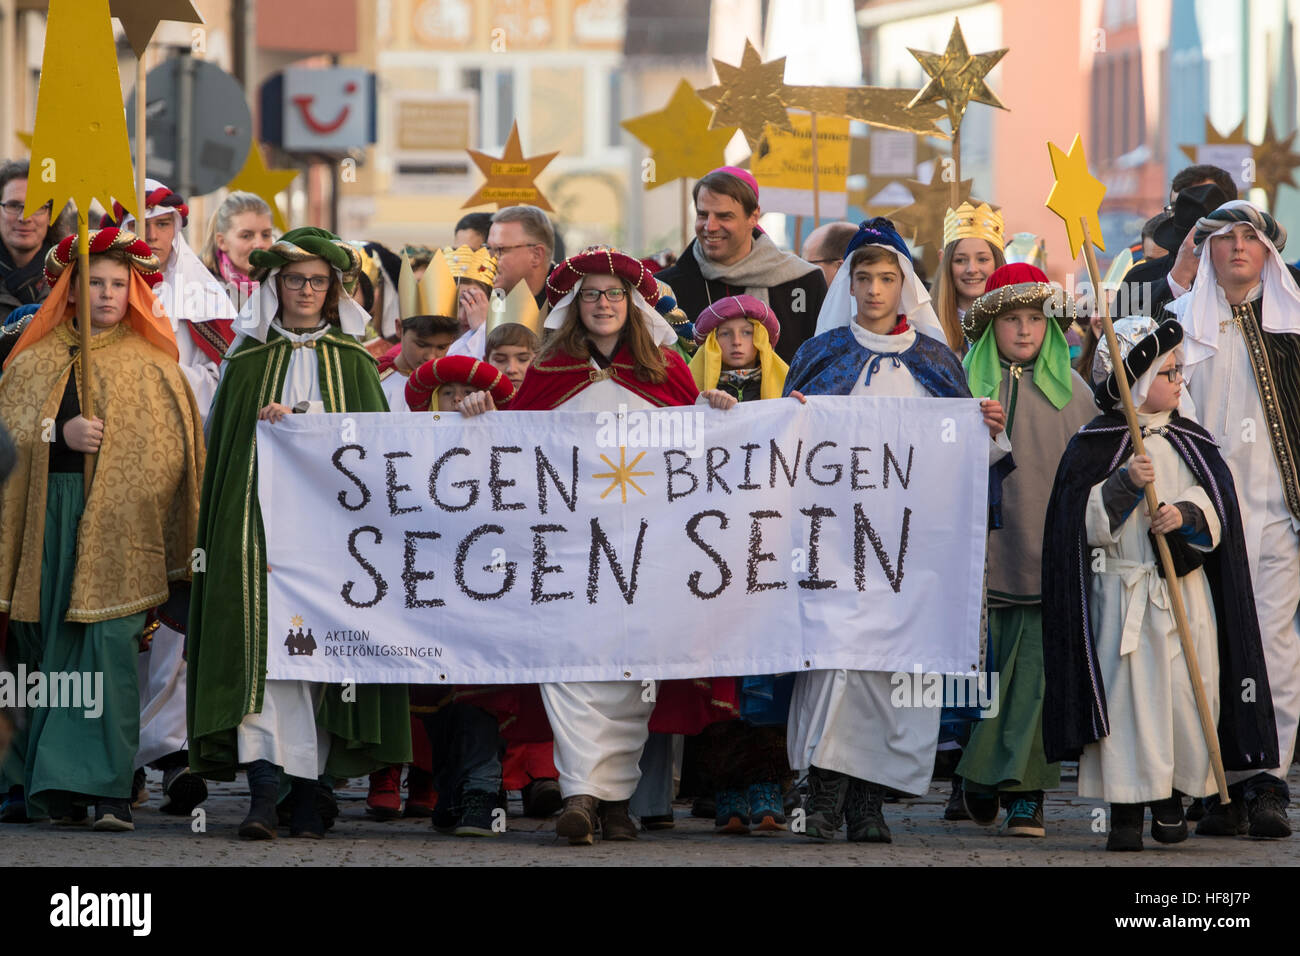 Star singers (also known as epiphany singers) take part in the opening ceremony of the nationwide German star singing event in Neumarkt in der Oberpfalz, Germany, 29 December 2016. Star singers travel from house to house and ask for donations to charitable causes across the world every 6th January. Photo: Armin Weigel/dpa Stock Photo